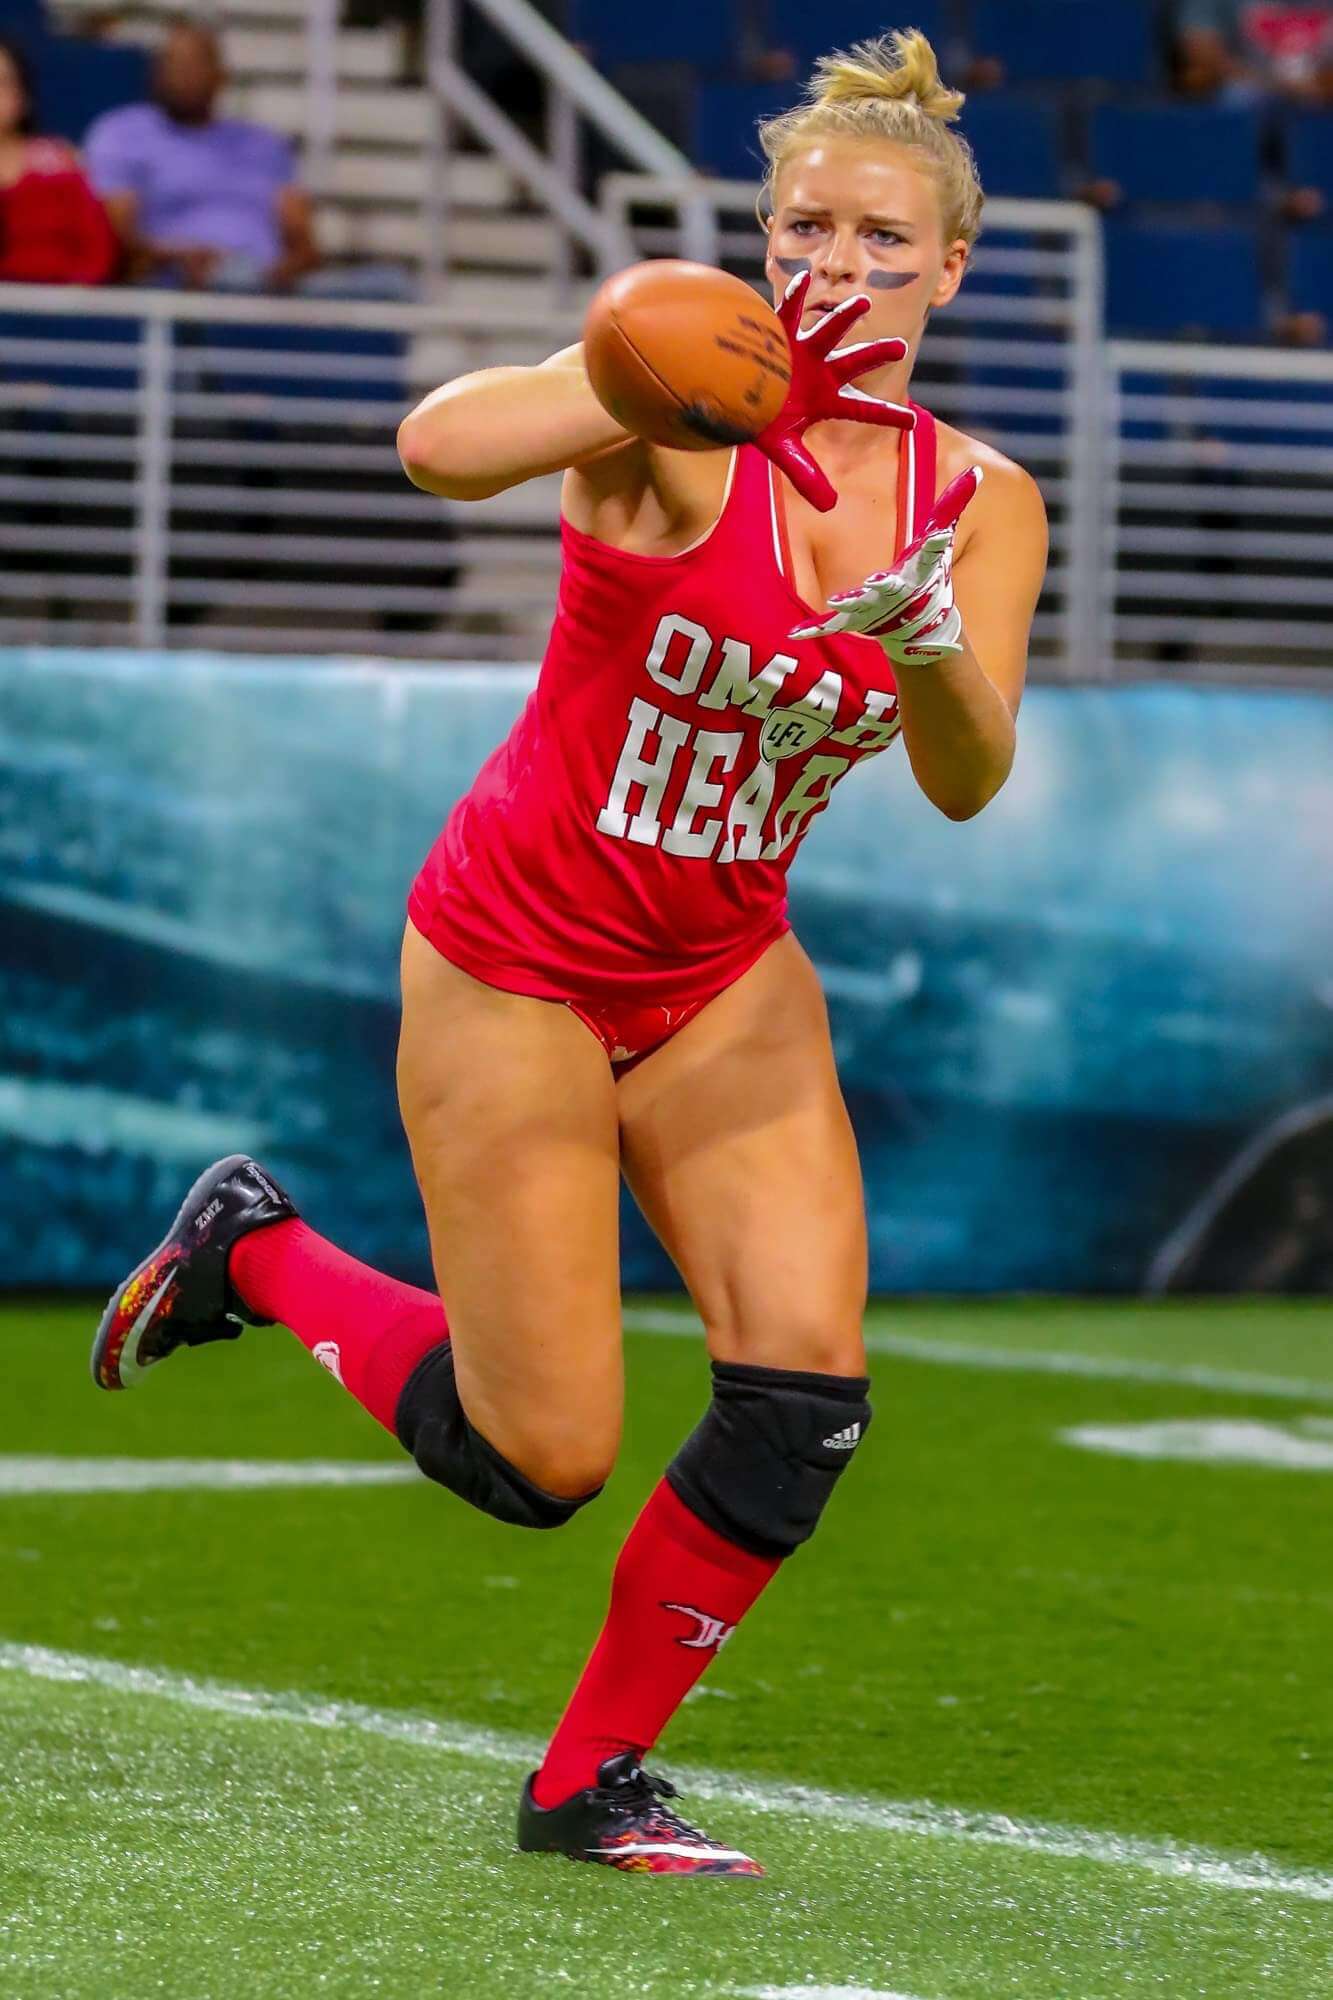 The Legends Football League Beautiful Women And Football, Need We Say Anymore! 88